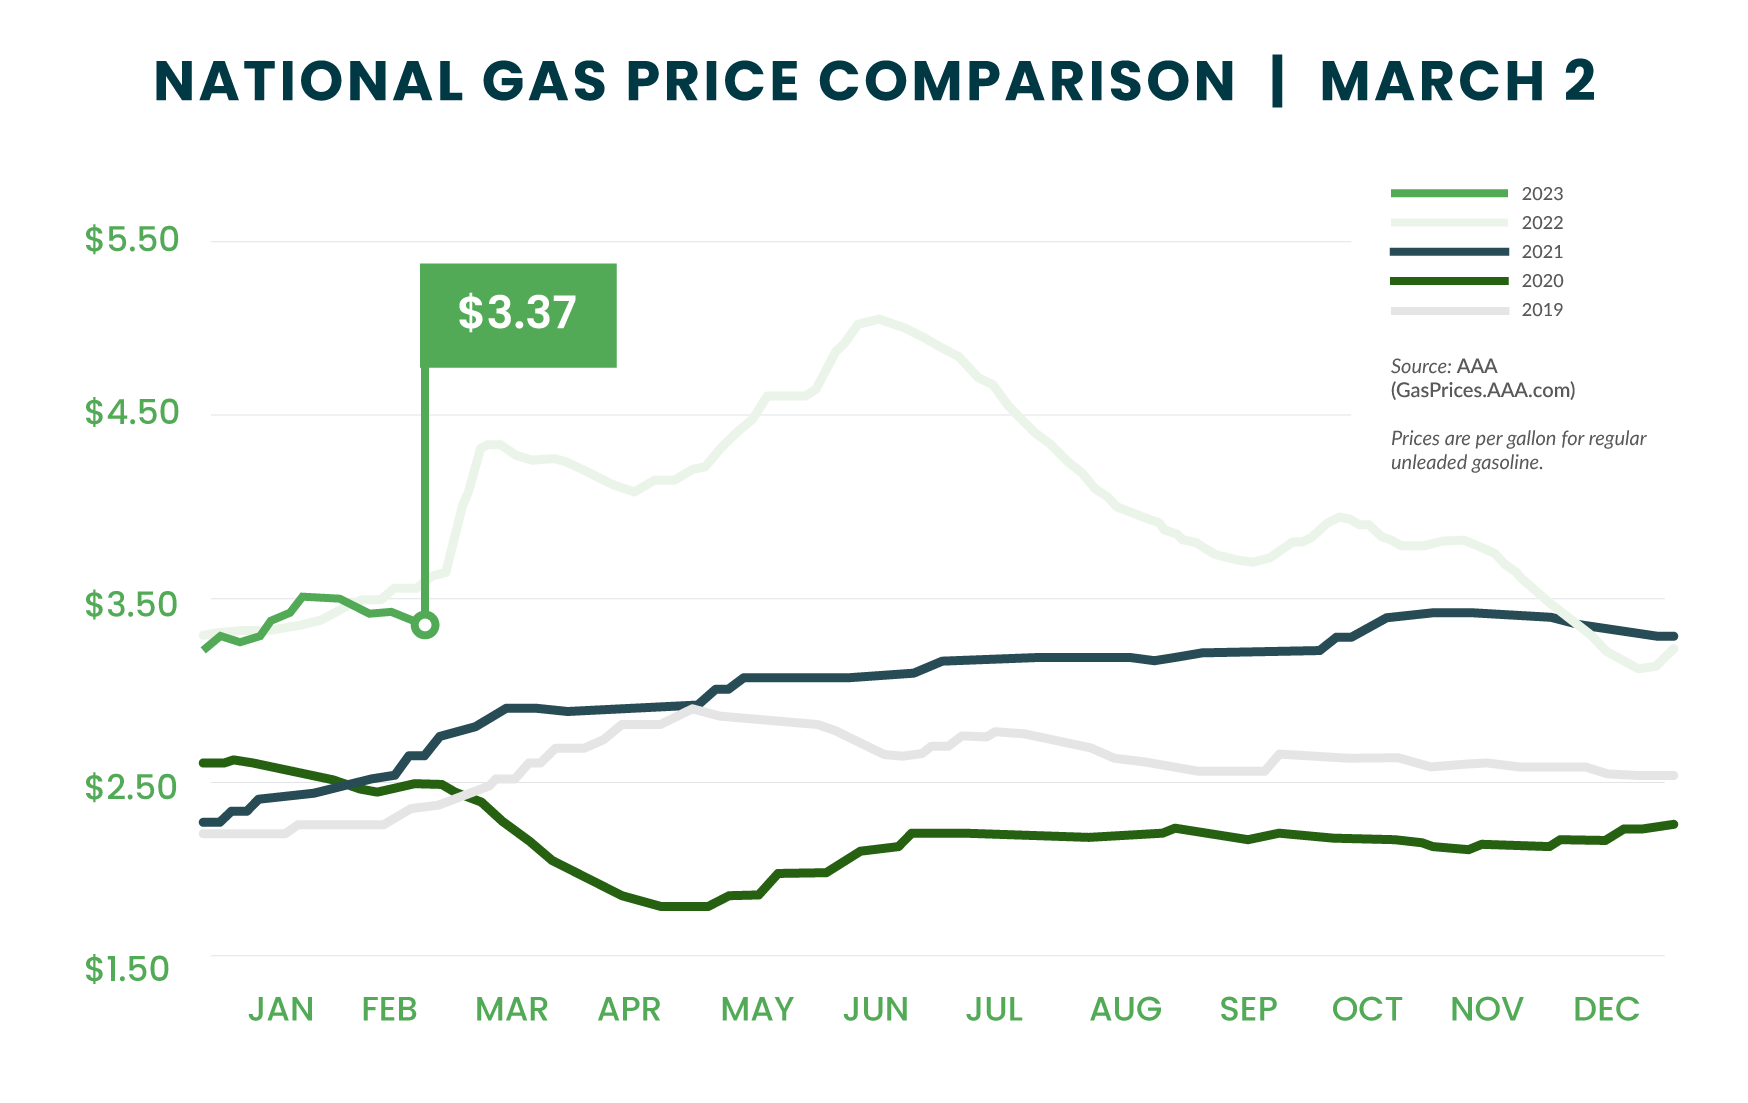 Triple A's gas prices over time.